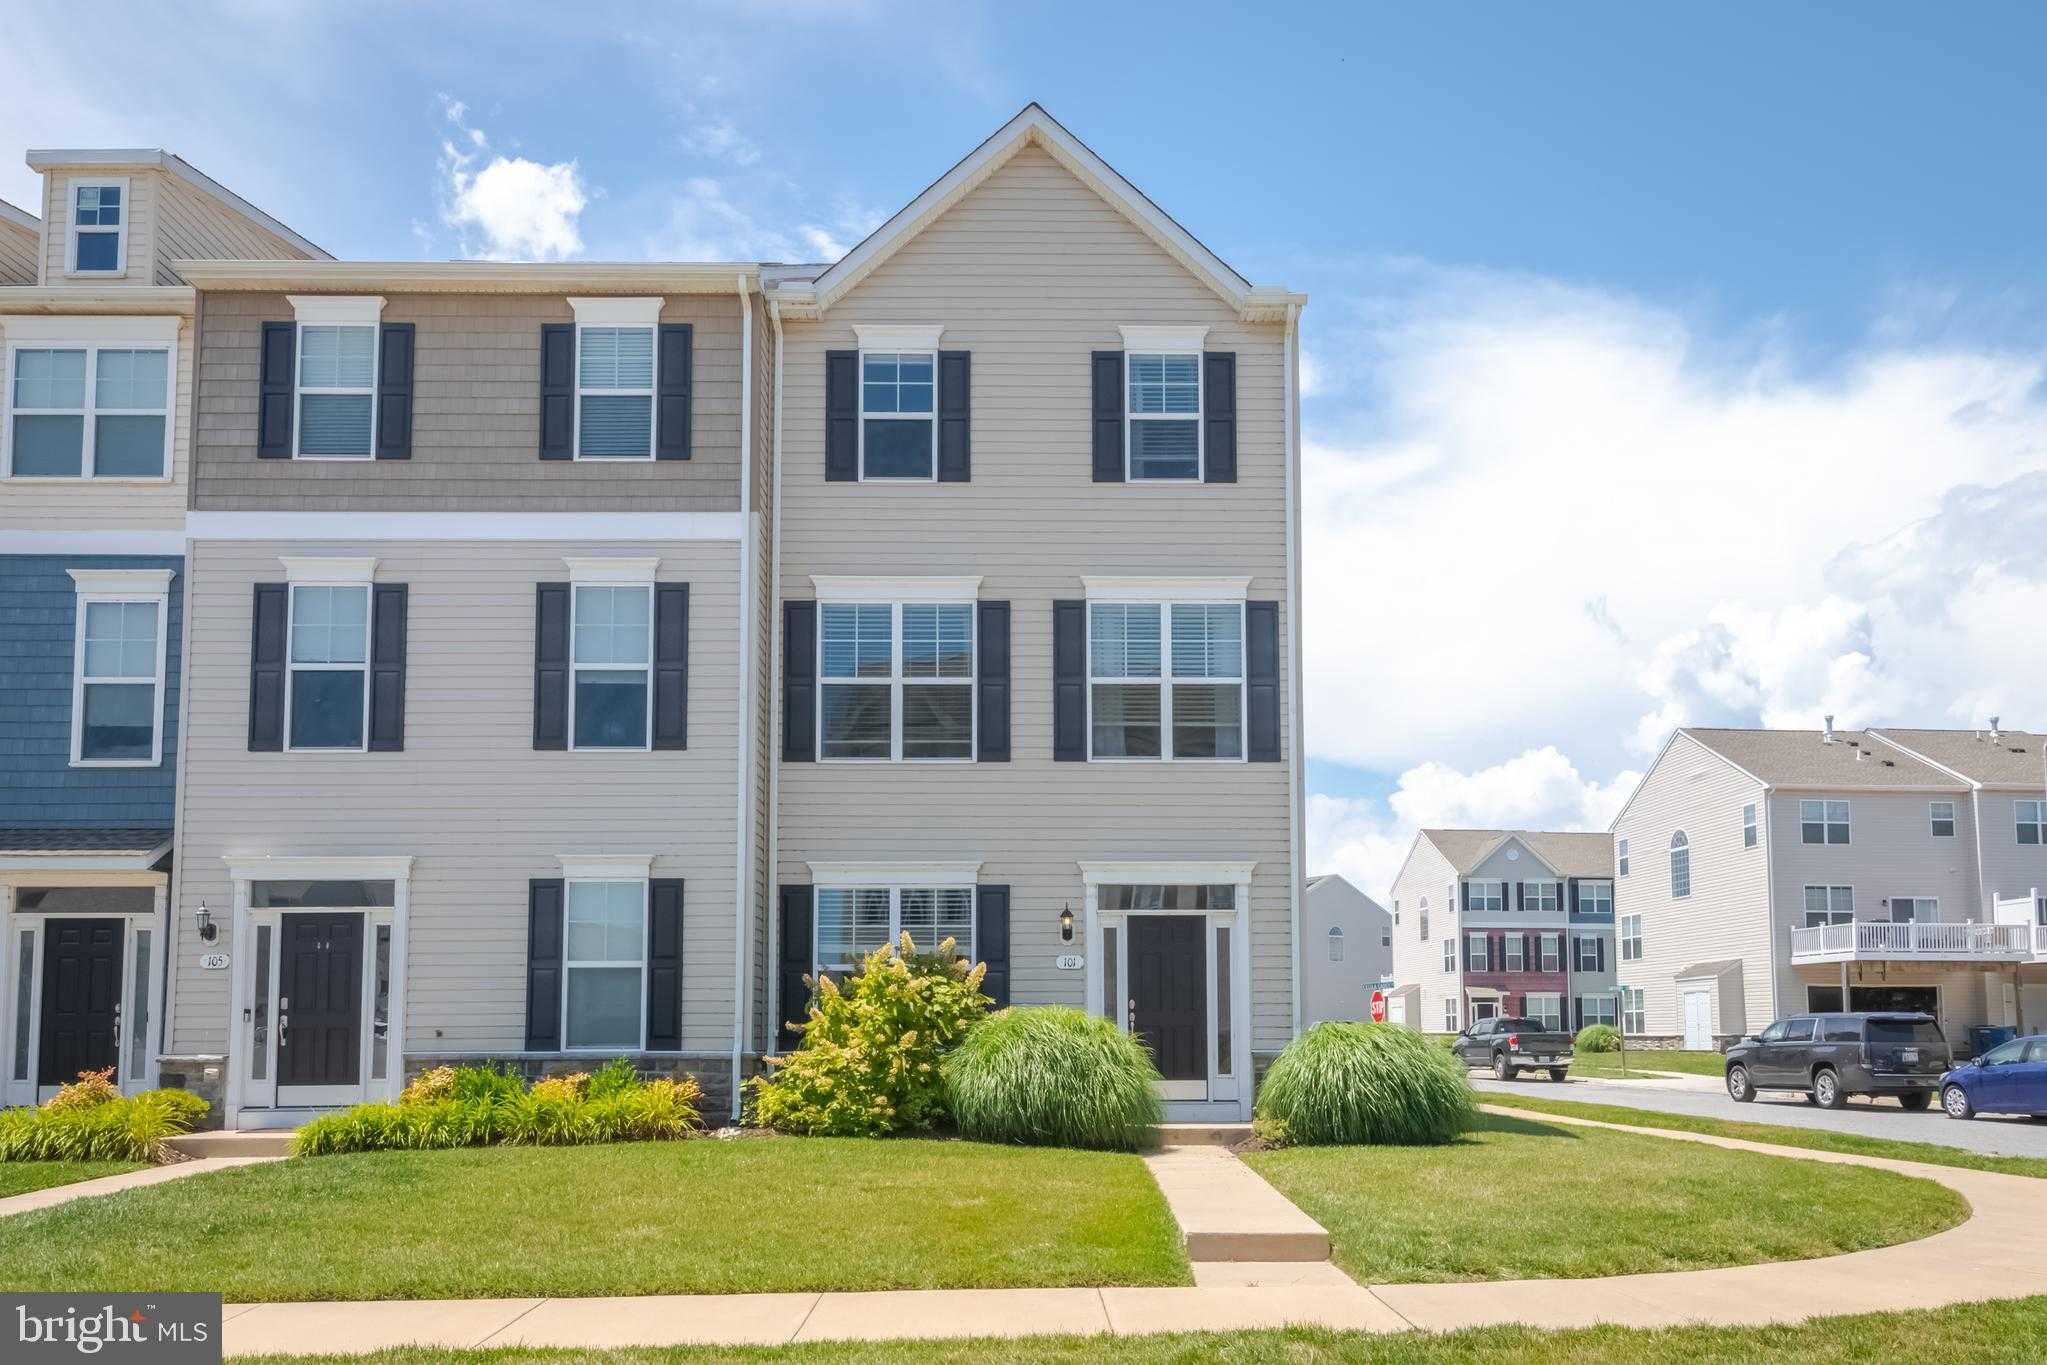 View STEVENSVILLE, MD 21666 townhome